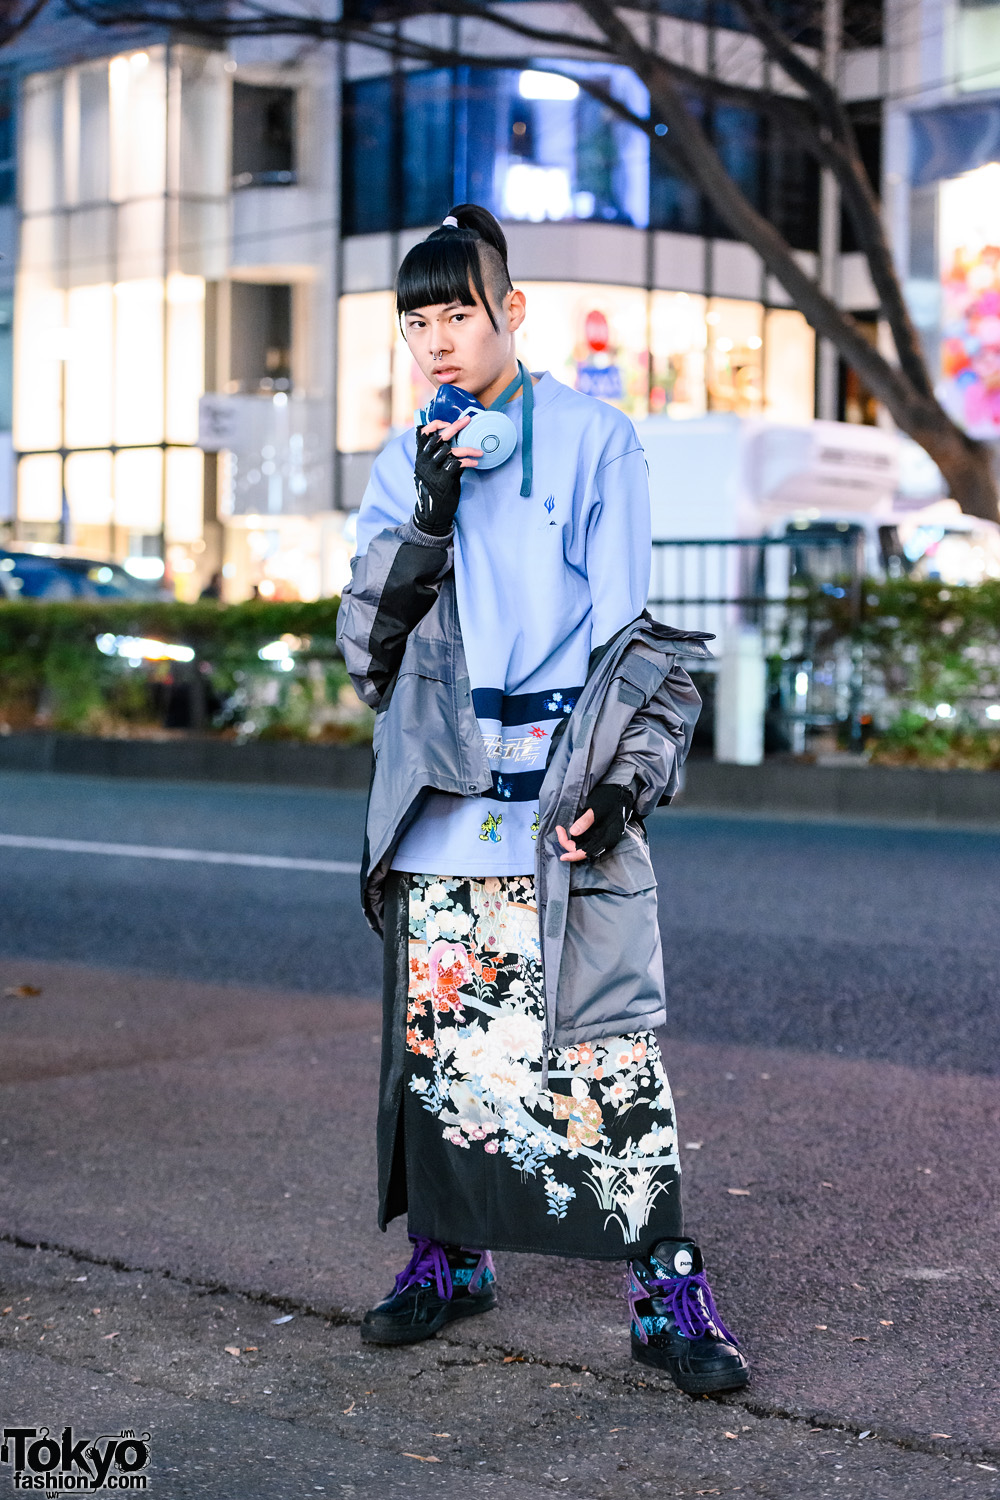 Tokyo Streetwear Styles w/ Partially-Shaved Hair, Gas Mask, Clear ...